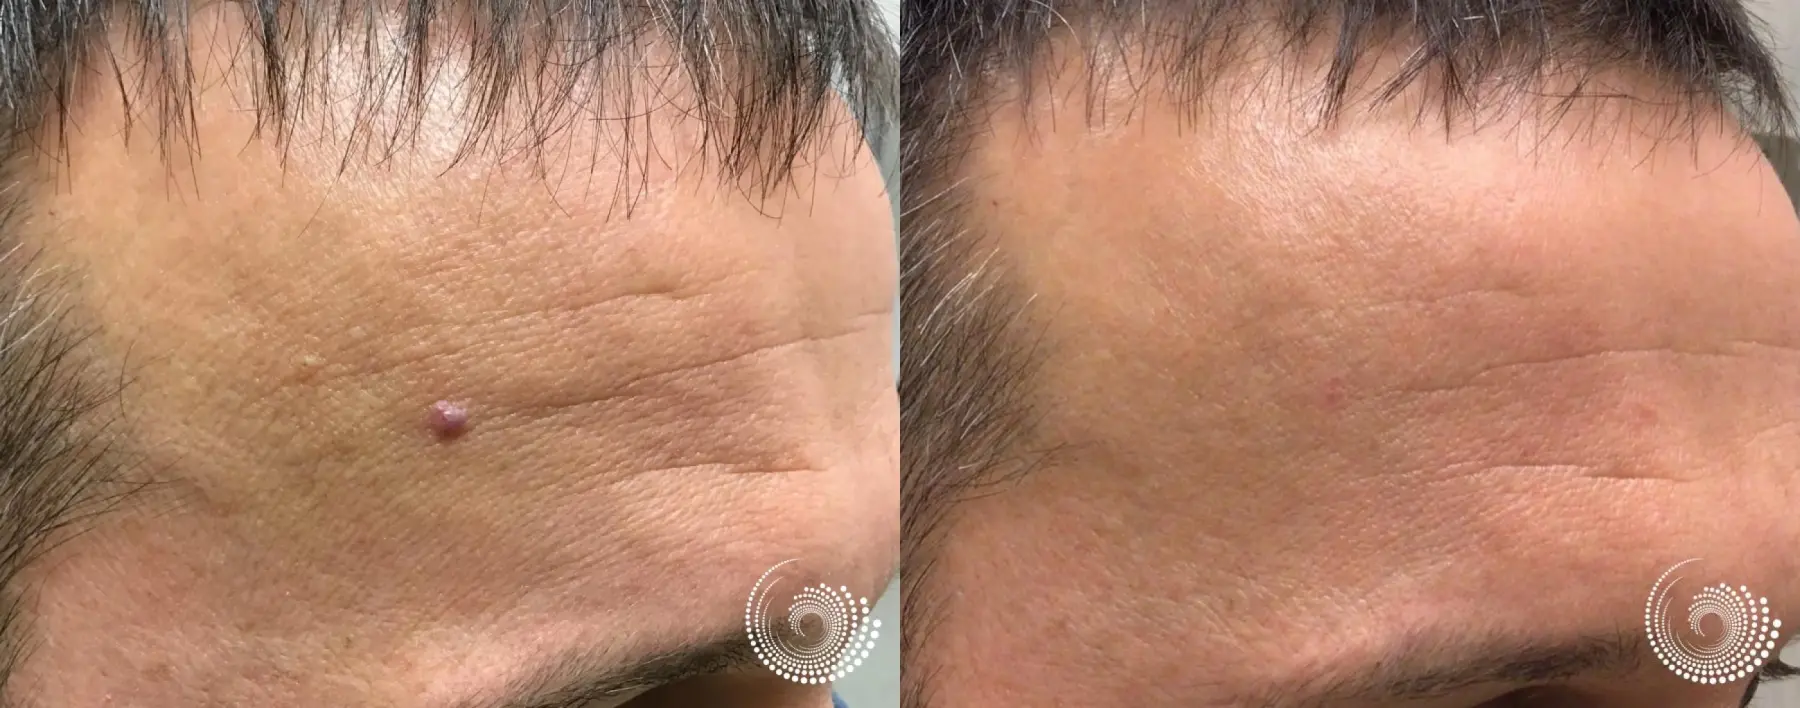 Laser - YAG: Patient 1 - Before and After 1